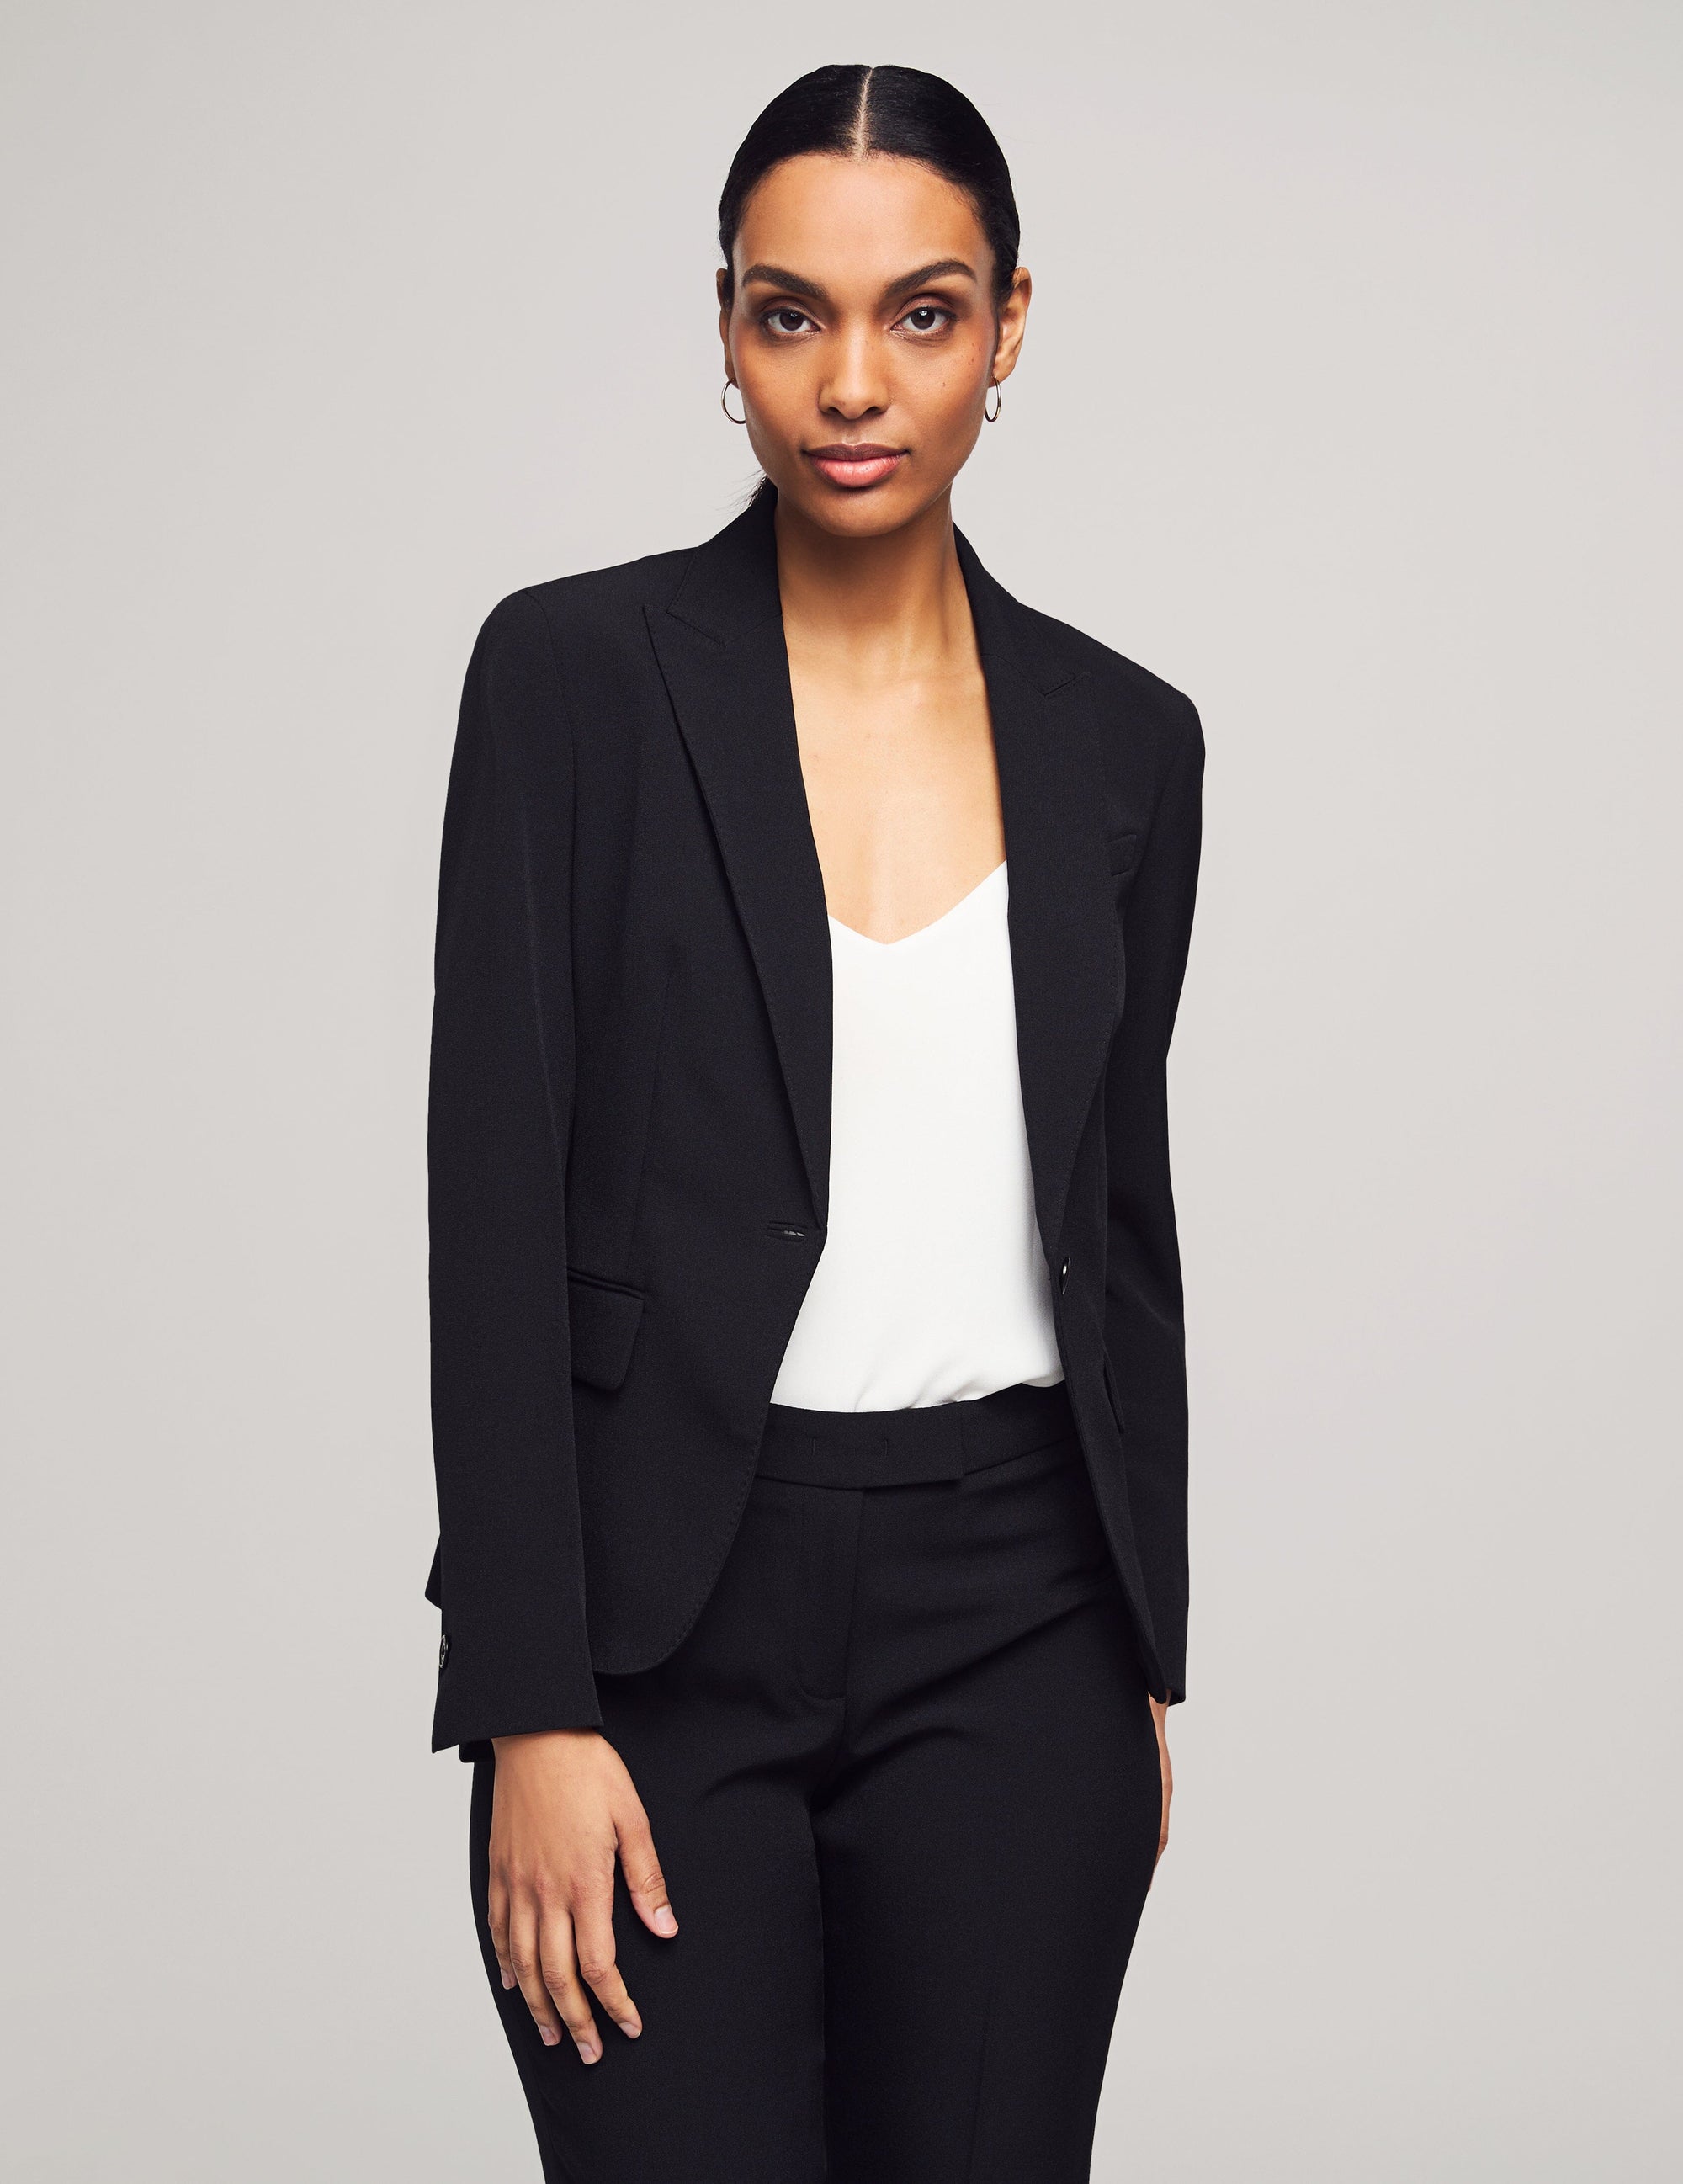 How to Style a Black Suit for Women - Town of Broadalbin